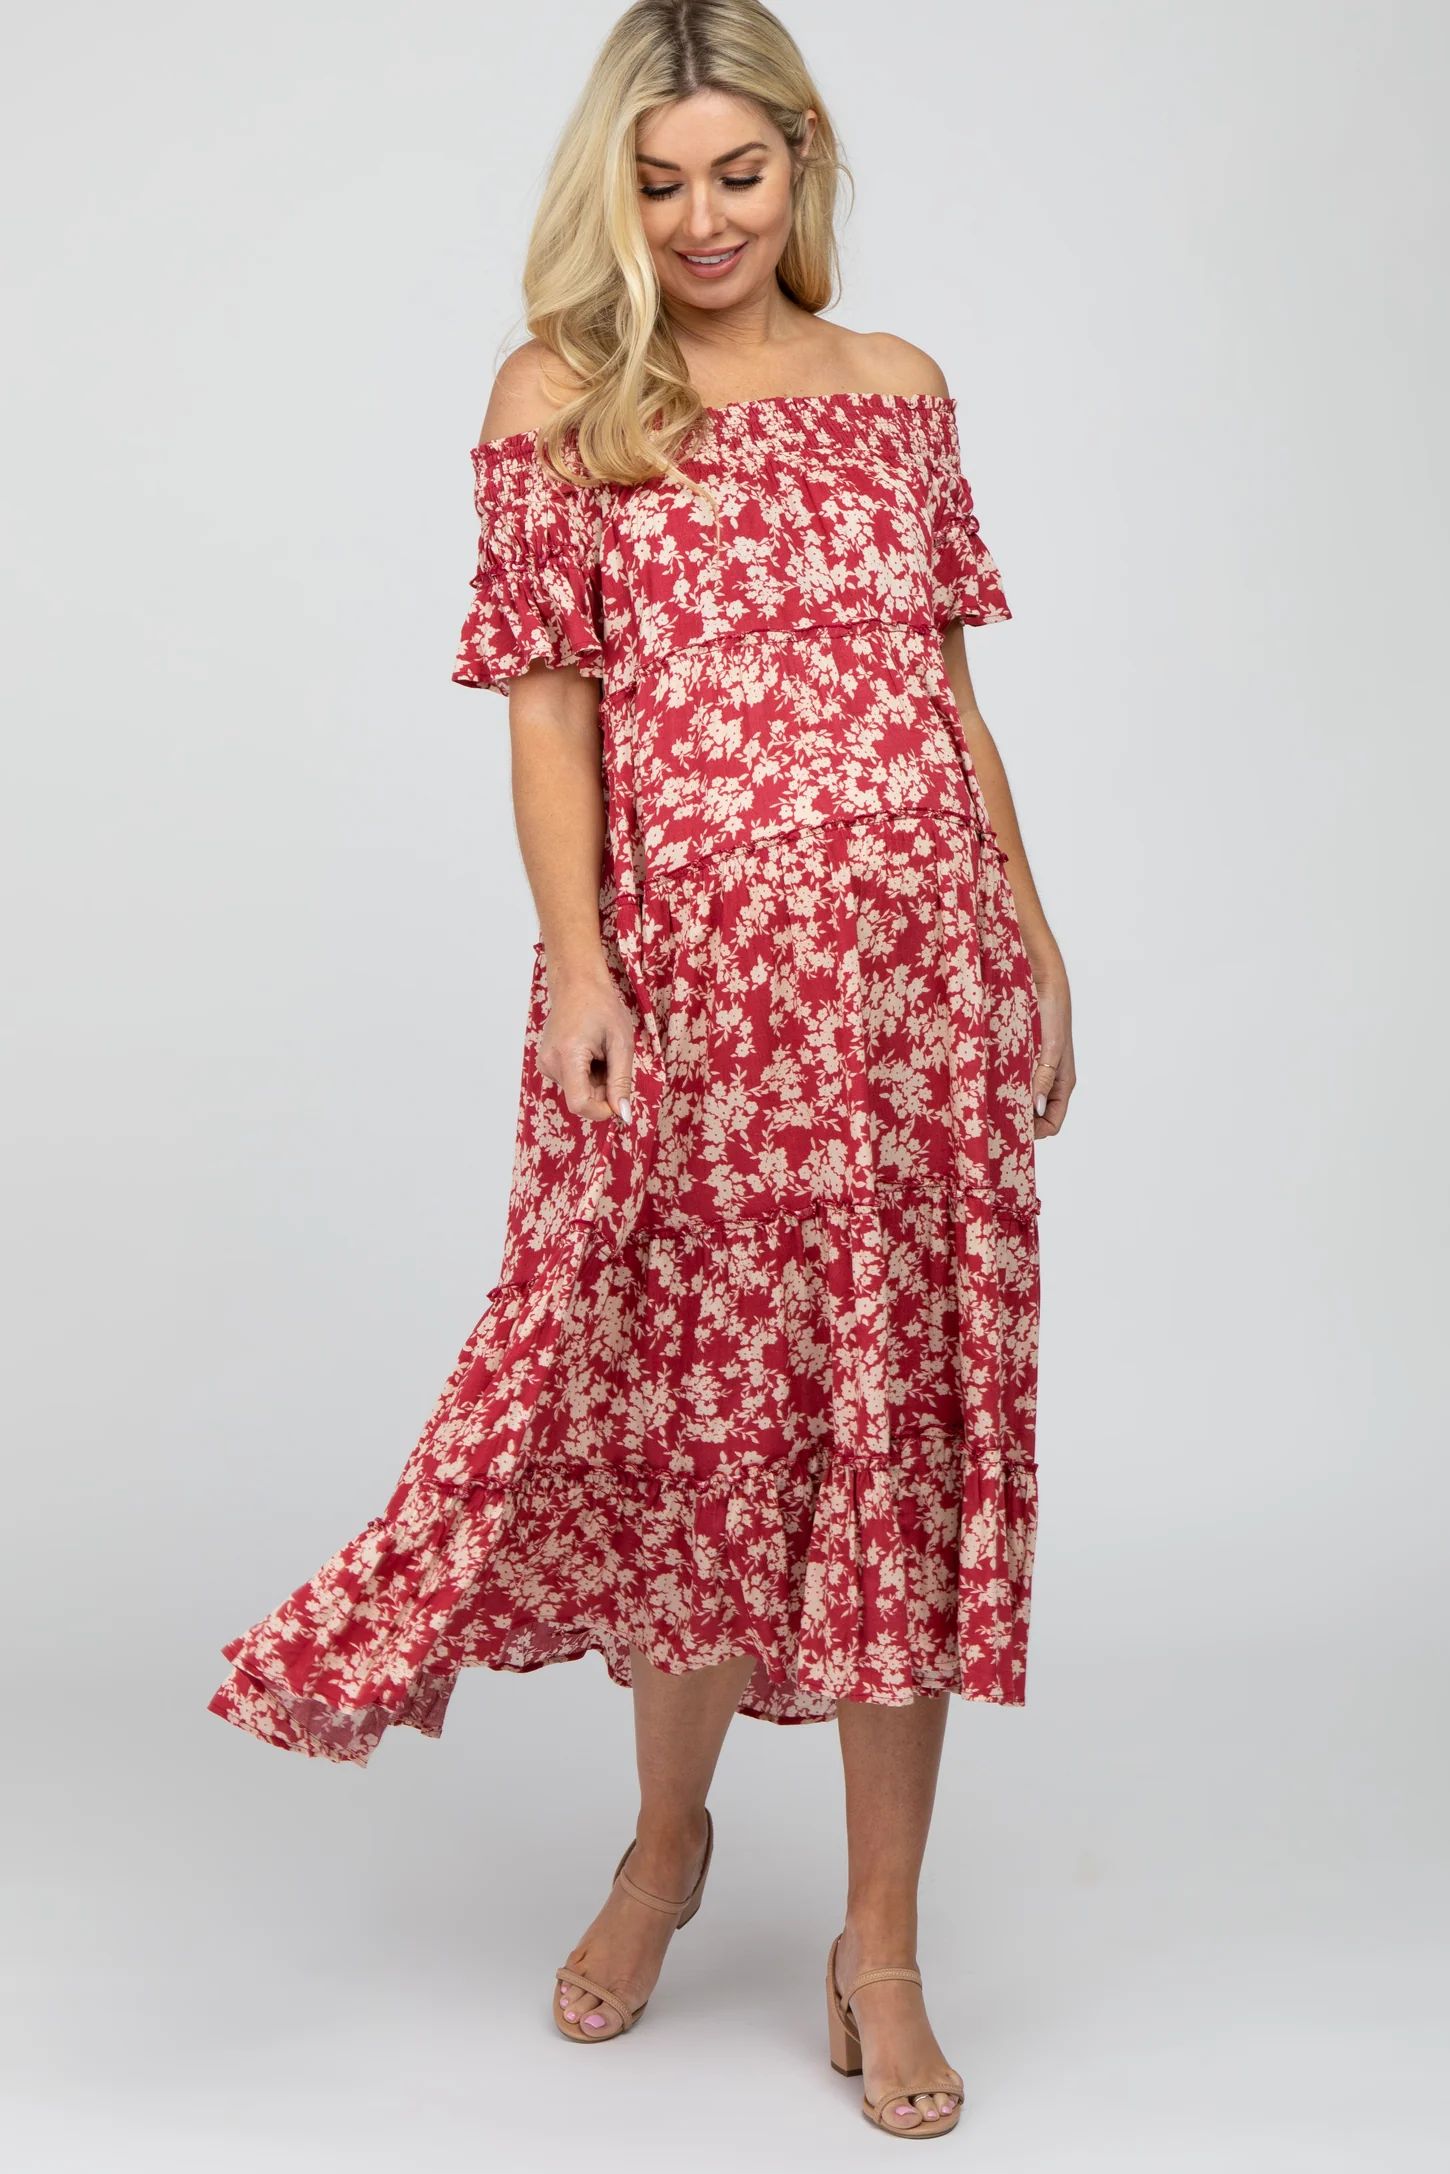 Red Floral Off Shoulder Tiered Maternity Dress | PinkBlush Maternity